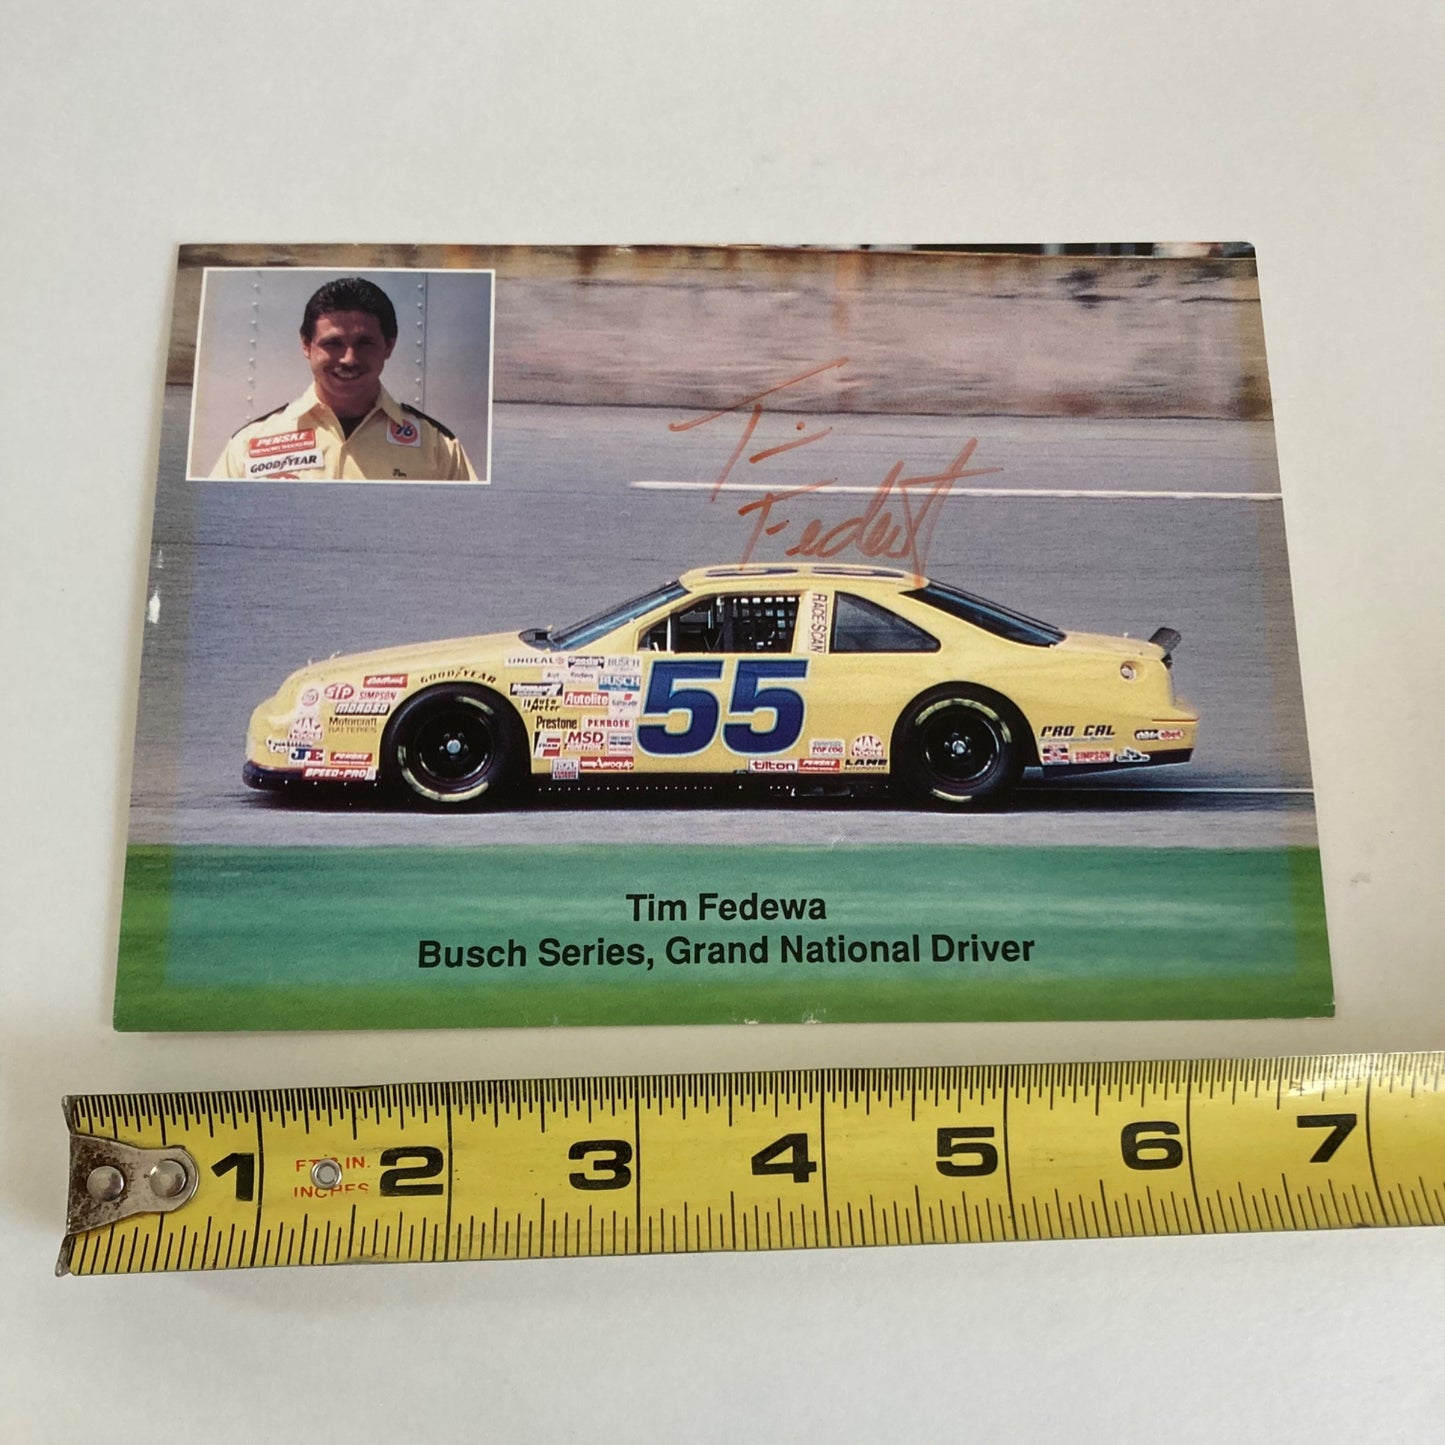 Vintage TED FEDEWA Autographed Photo Post Card Busch Series NASCAR Signed #55